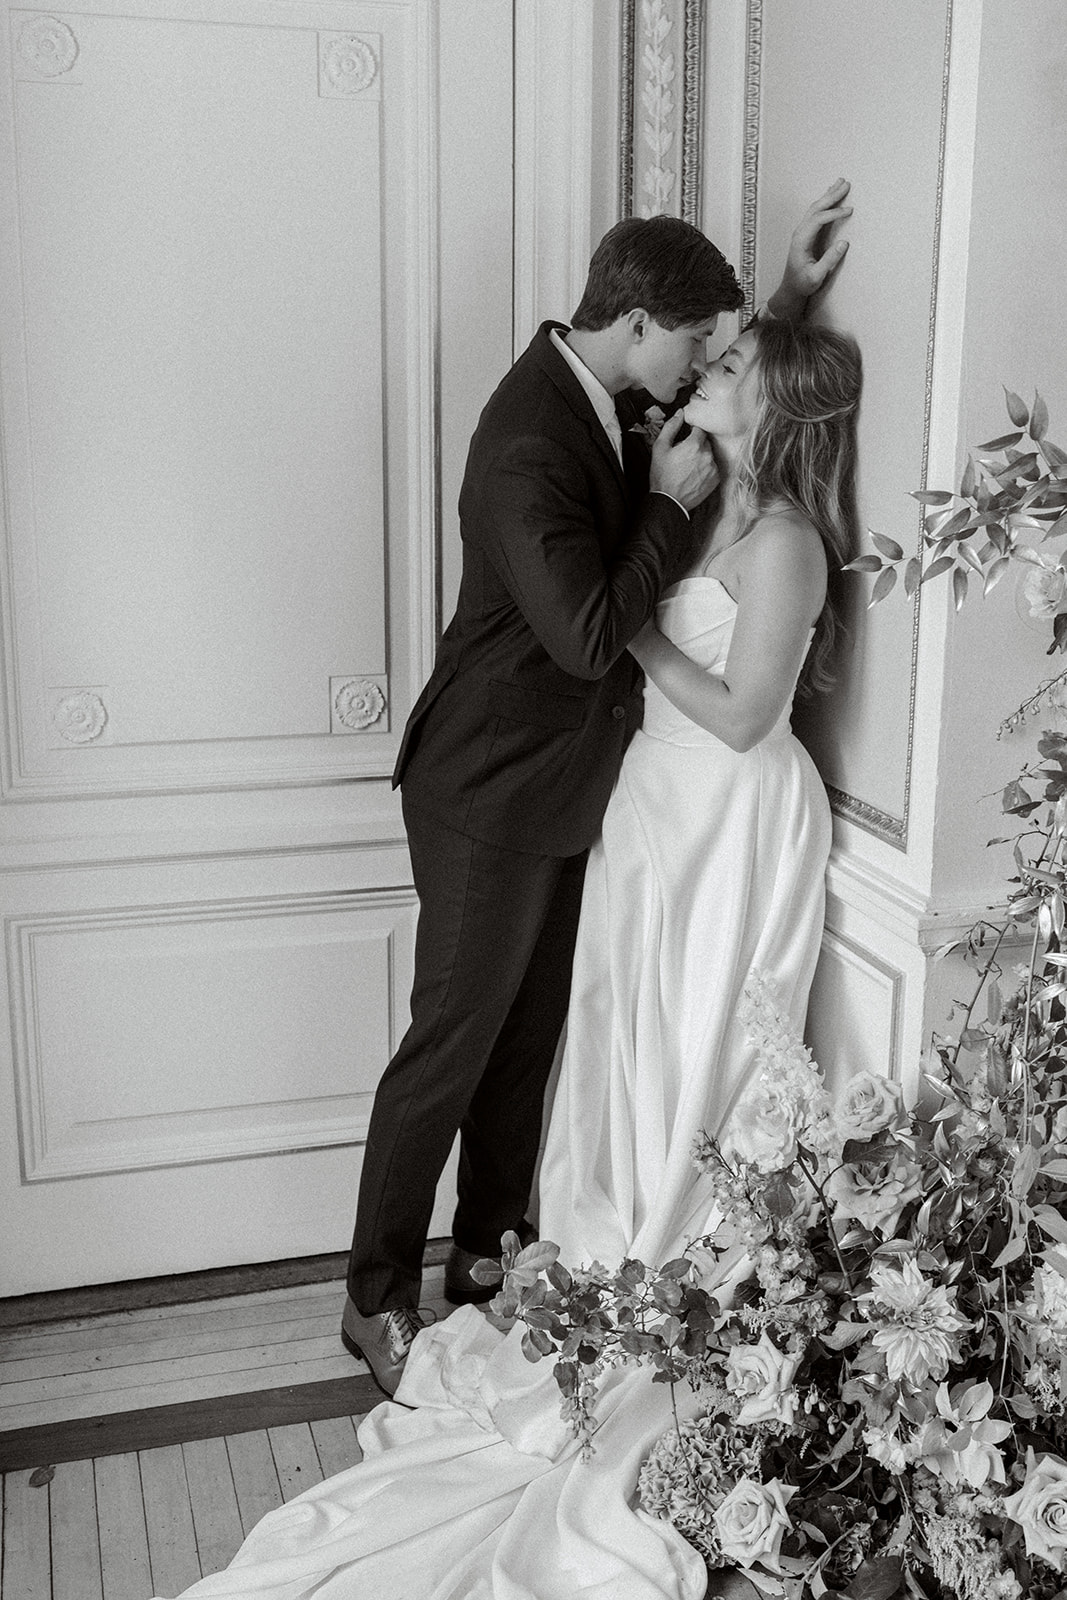 Beautiful couple in a candid moment, encapsulating the essence of a luxury wedding at Cairnwood Estate